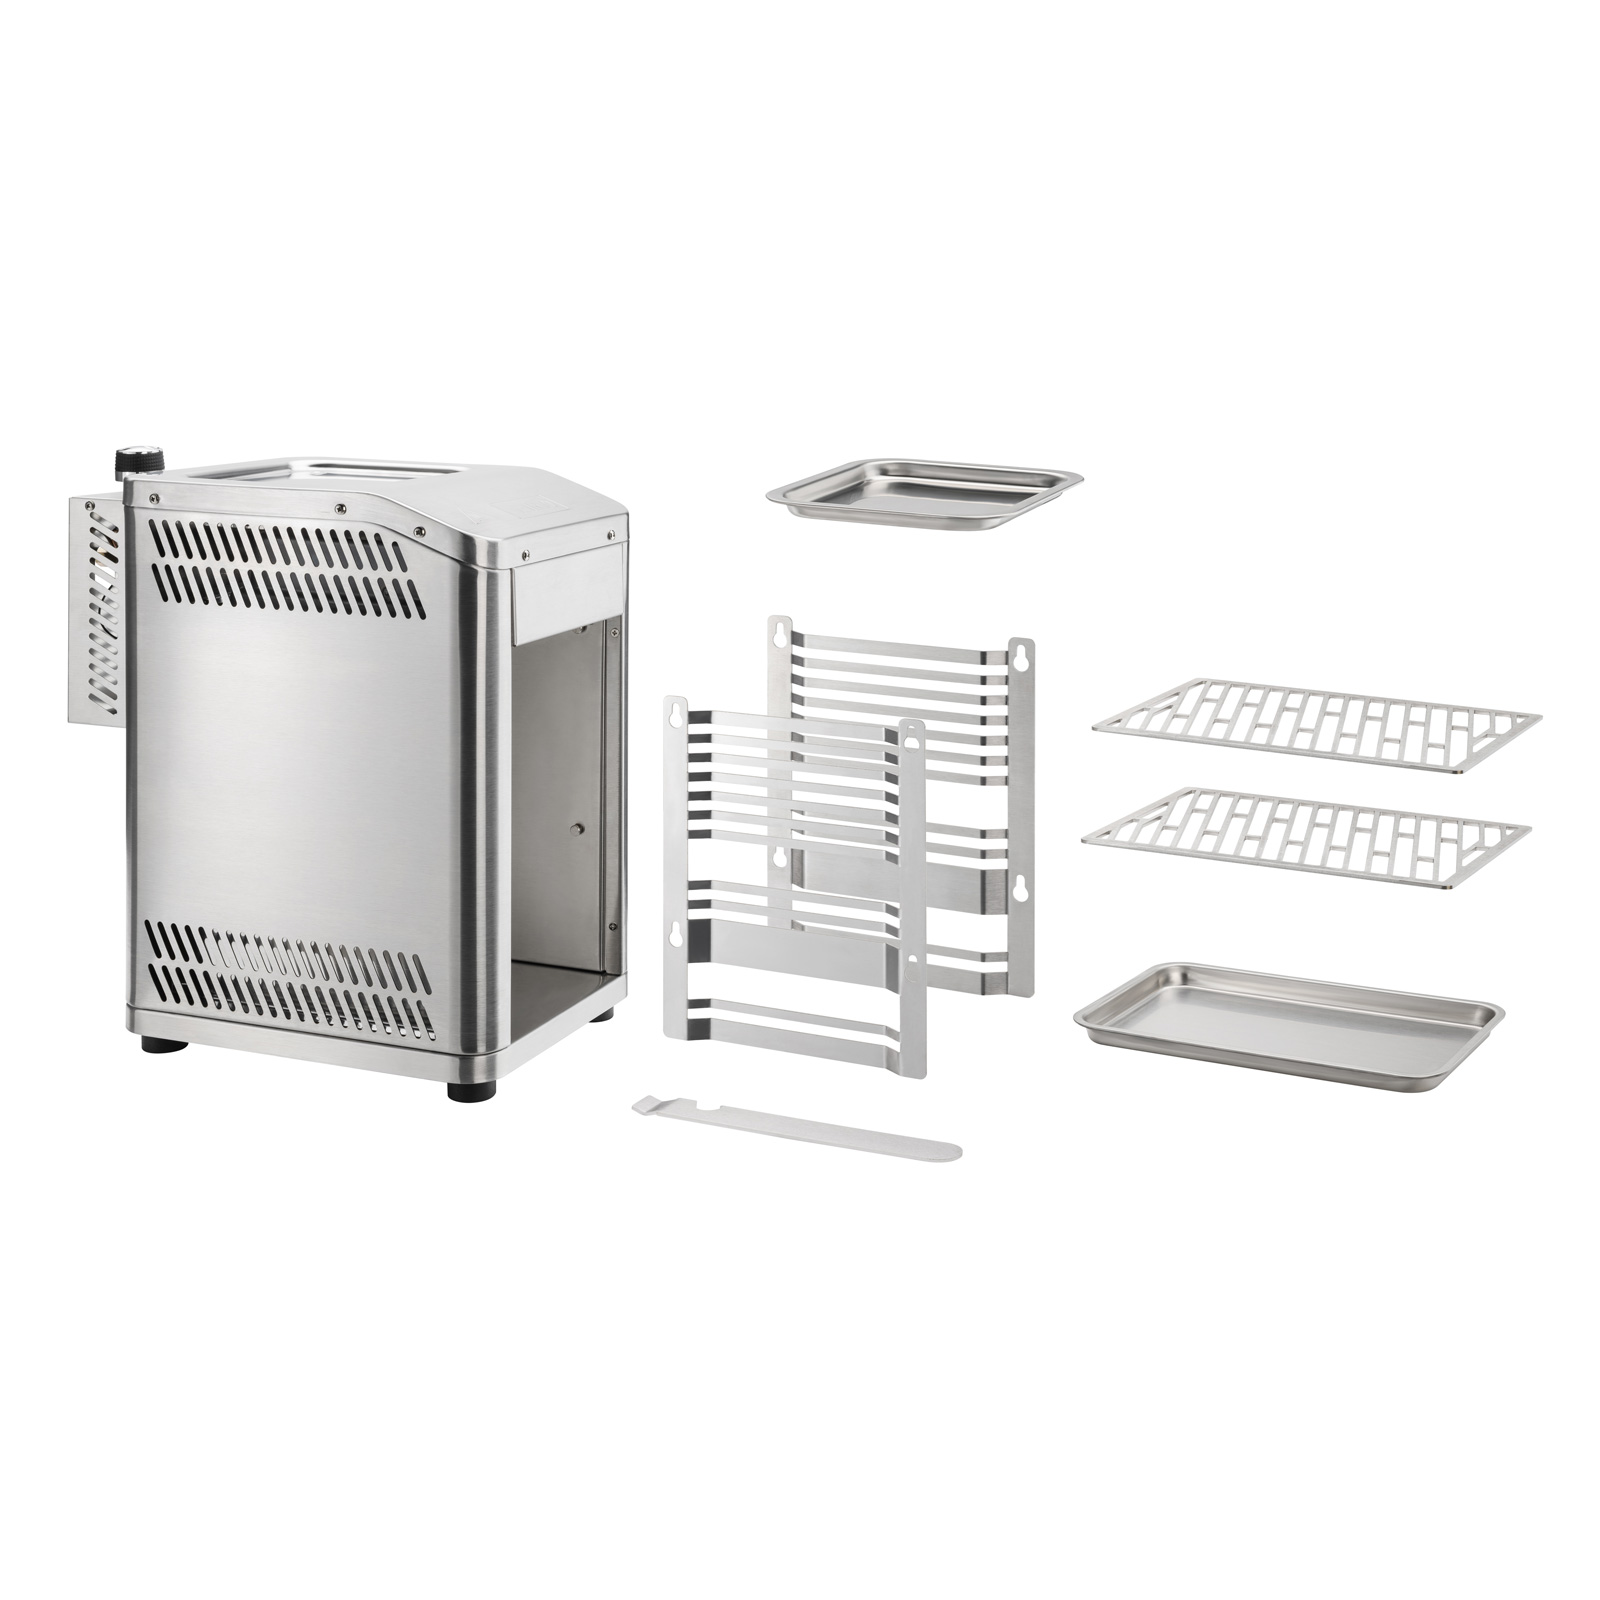 (3,5 kW) Silber Oberhitzegrill, Beef-Grill TAINO